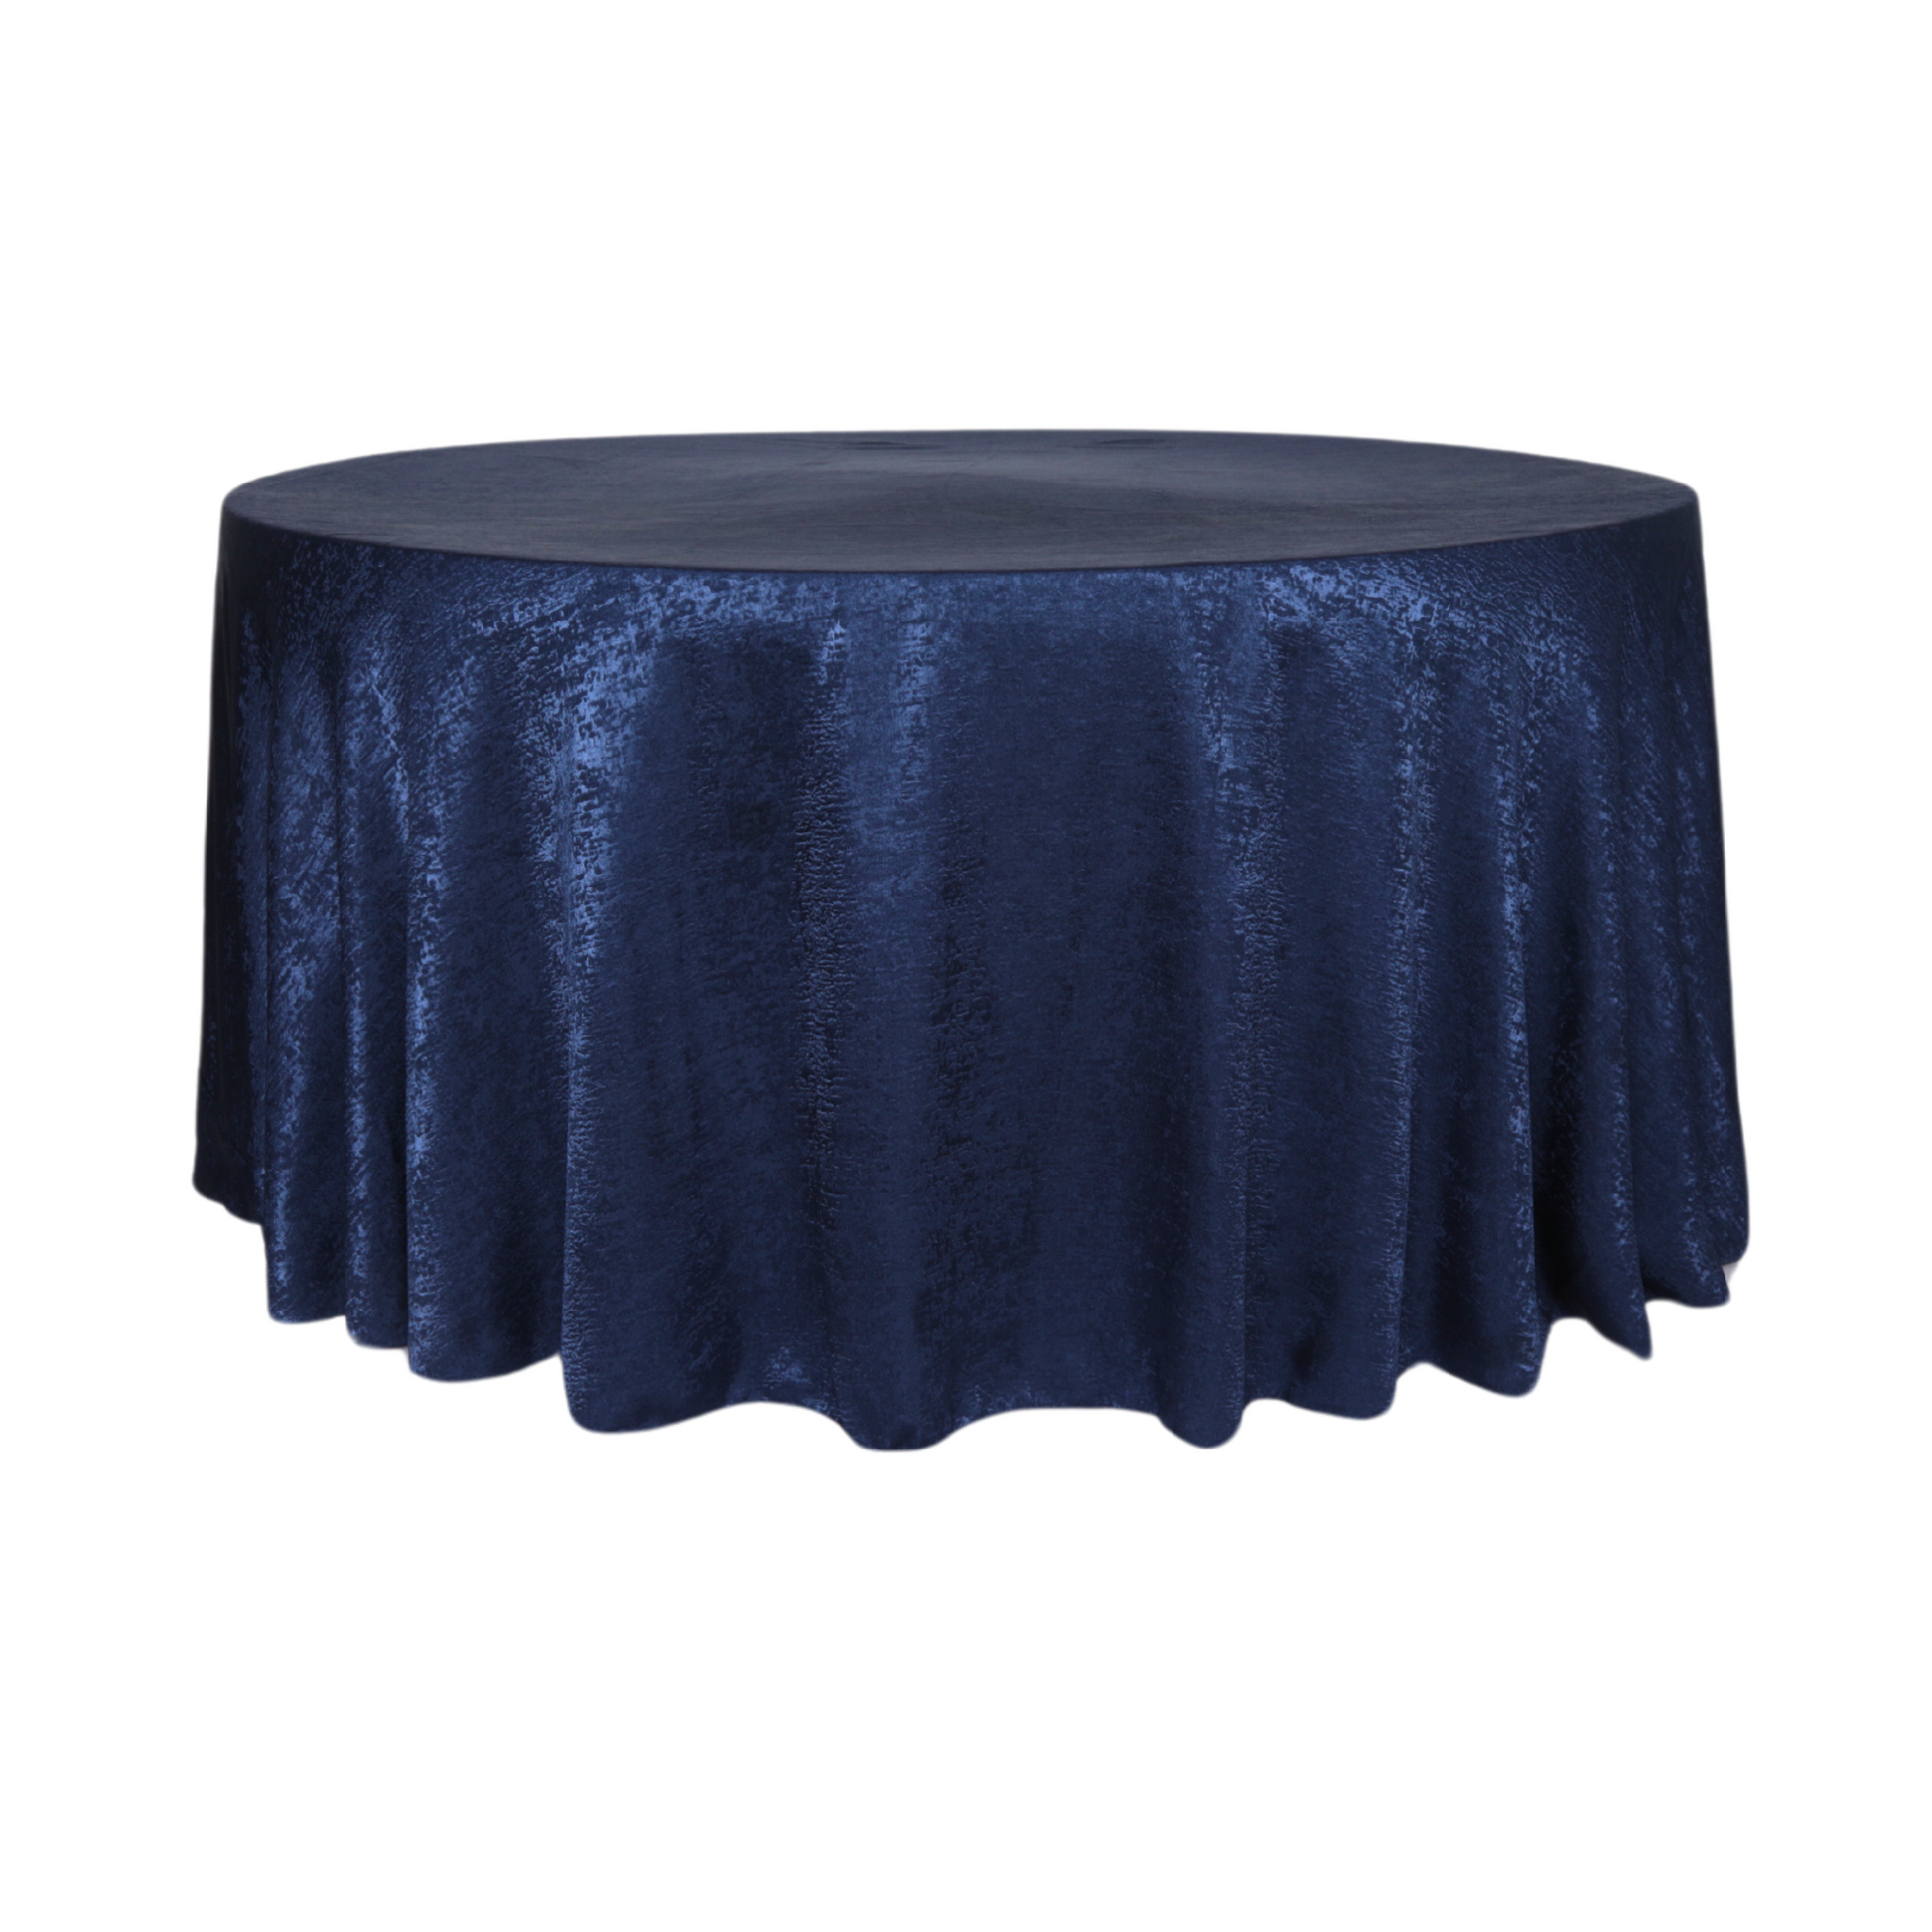 Crinkle Shimmer 132" Round Tablecloth - Navy Blue